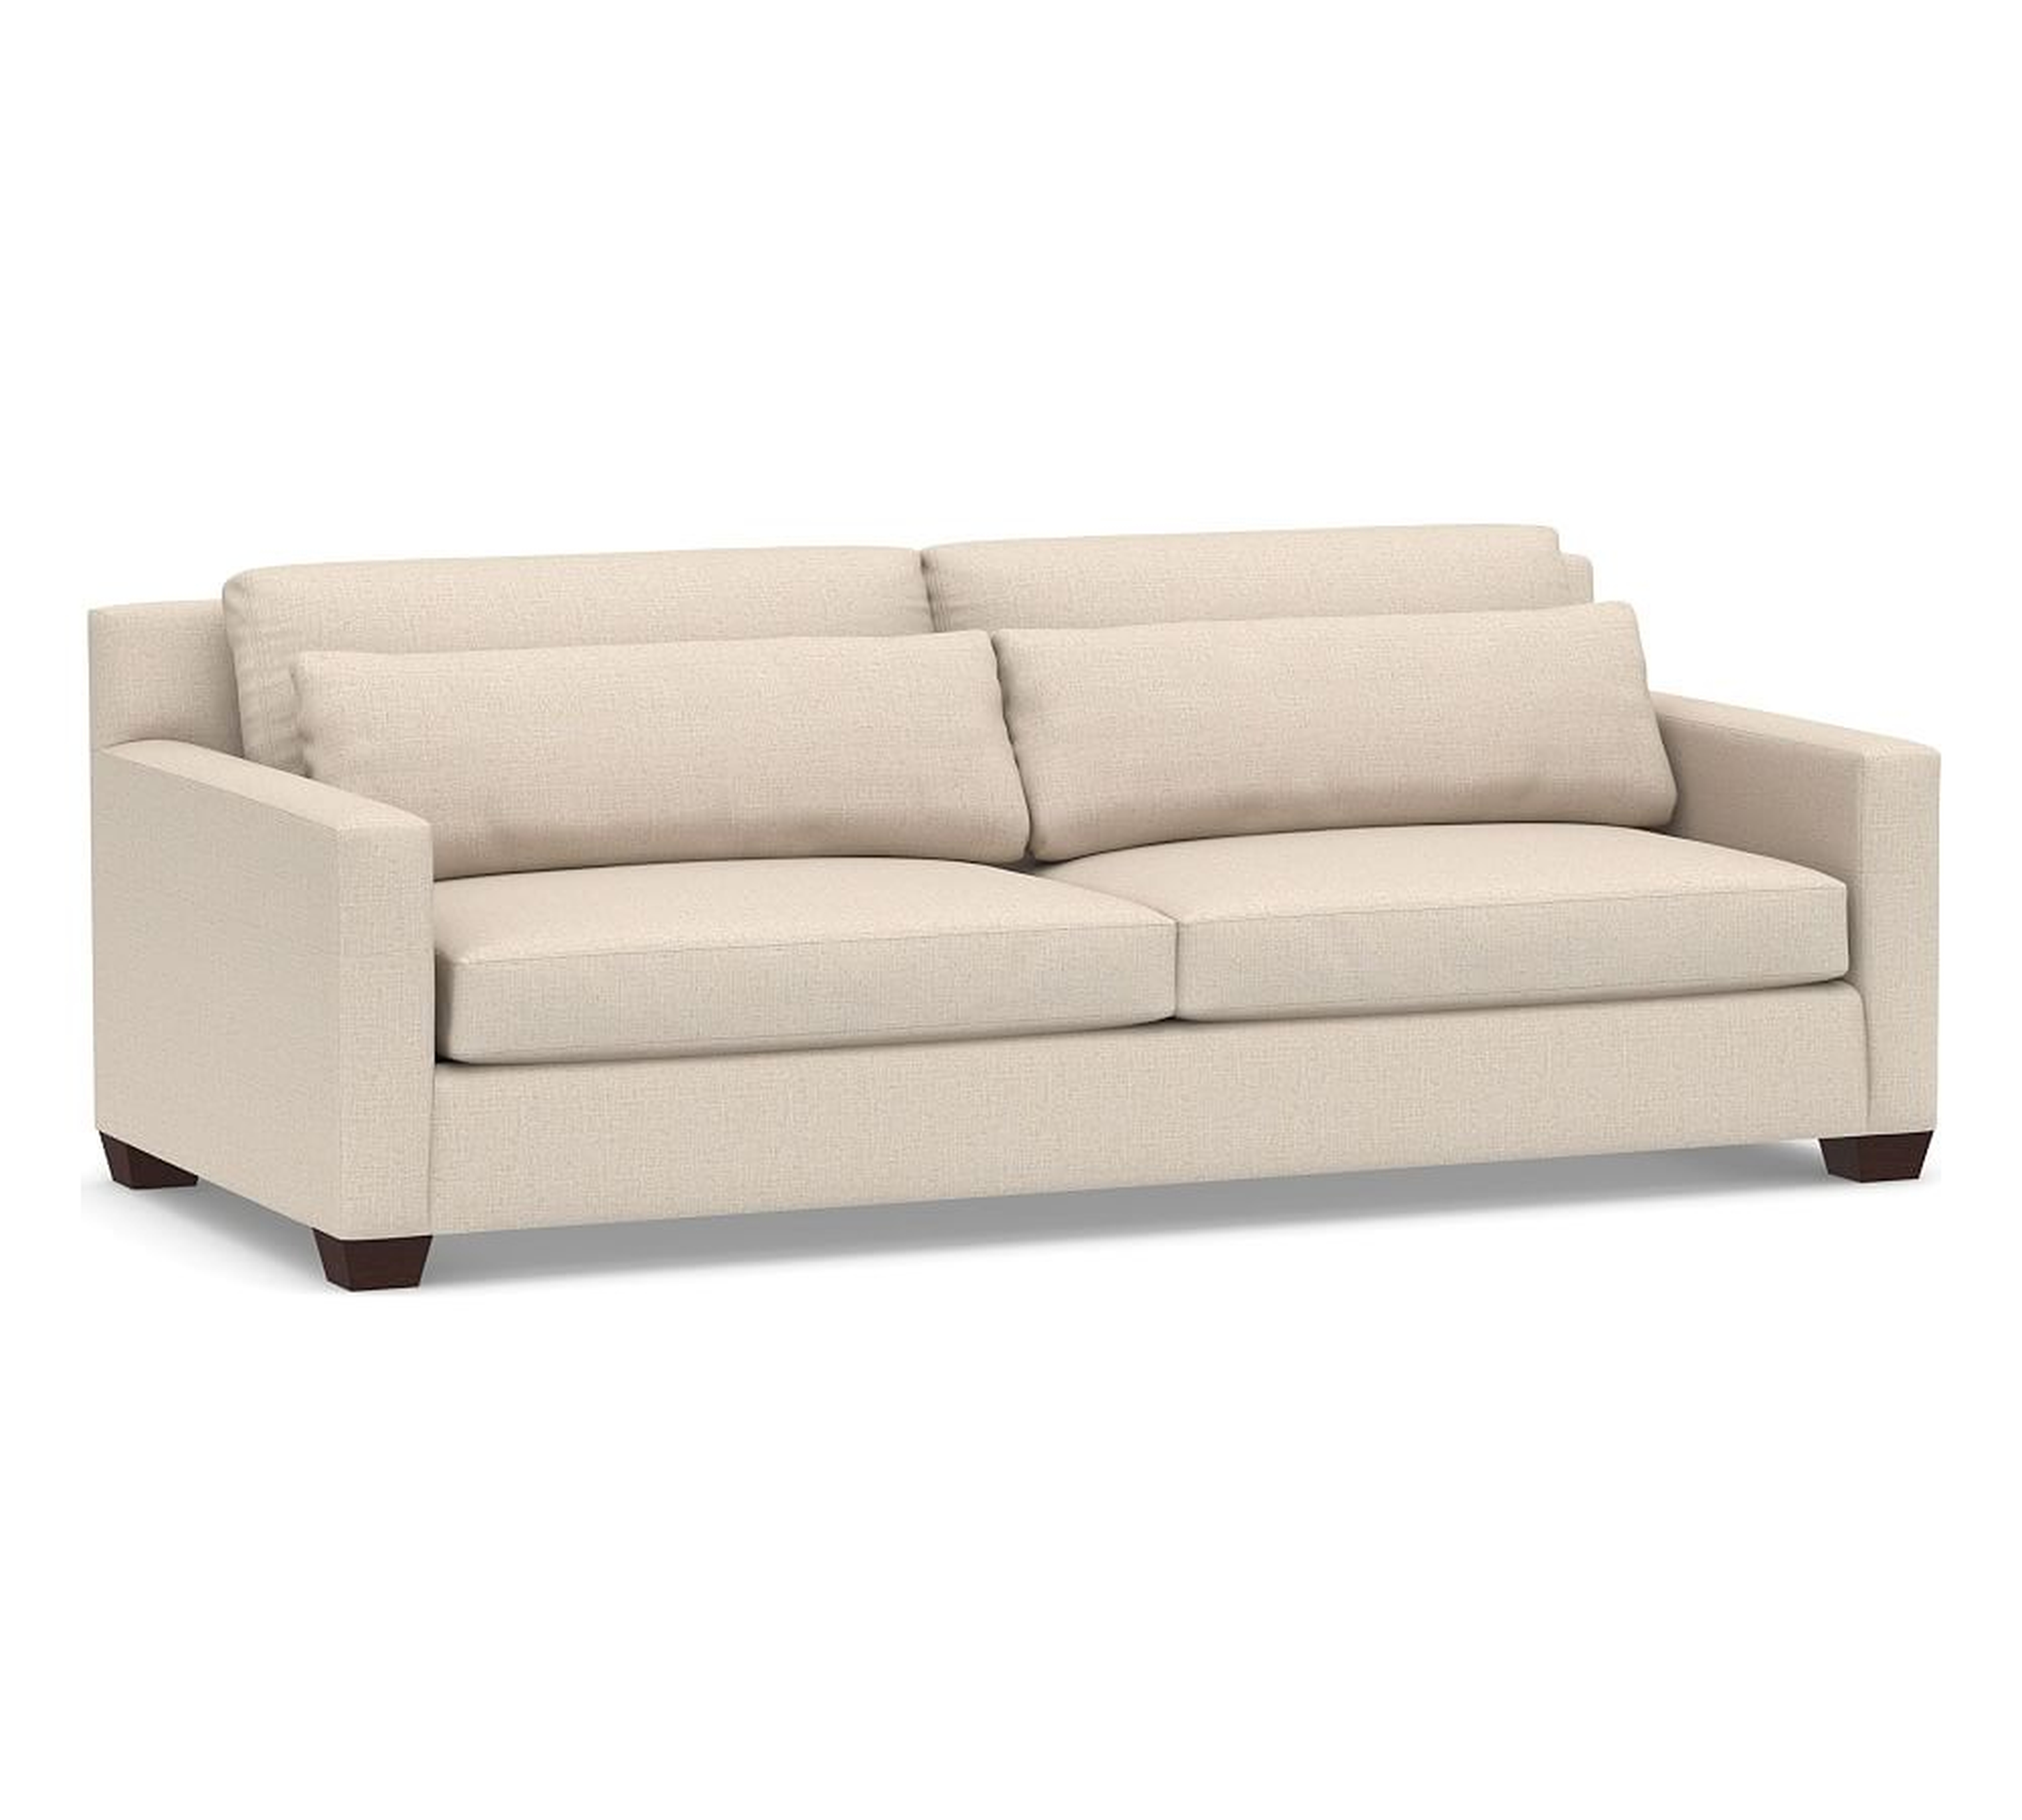 York Square Arm Upholstered Deep Seat Grand Sofa 2-Seater, Down Blend Wrapped Cushions, Performance Everydaylinen(TM) by Crypton(R) Home Oatmeal - Pottery Barn